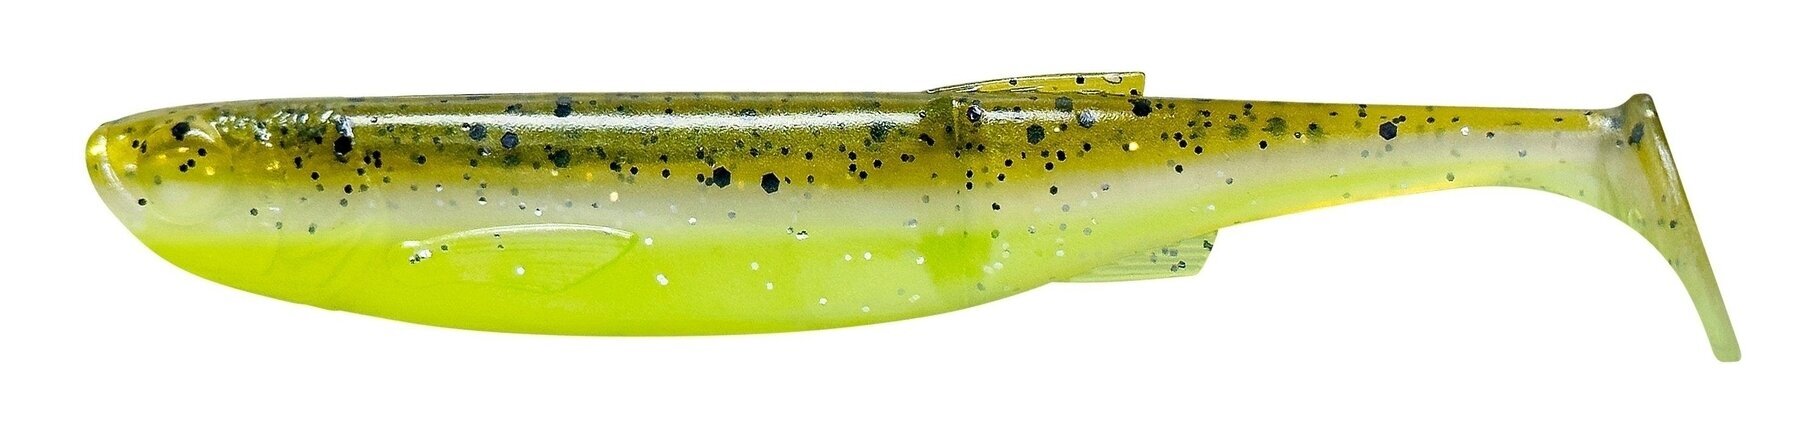 Rubber Lure Savage Gear Craft Bleak Clam 5 pcs Green Pearl Yellow 8,5 cm 4,2 g